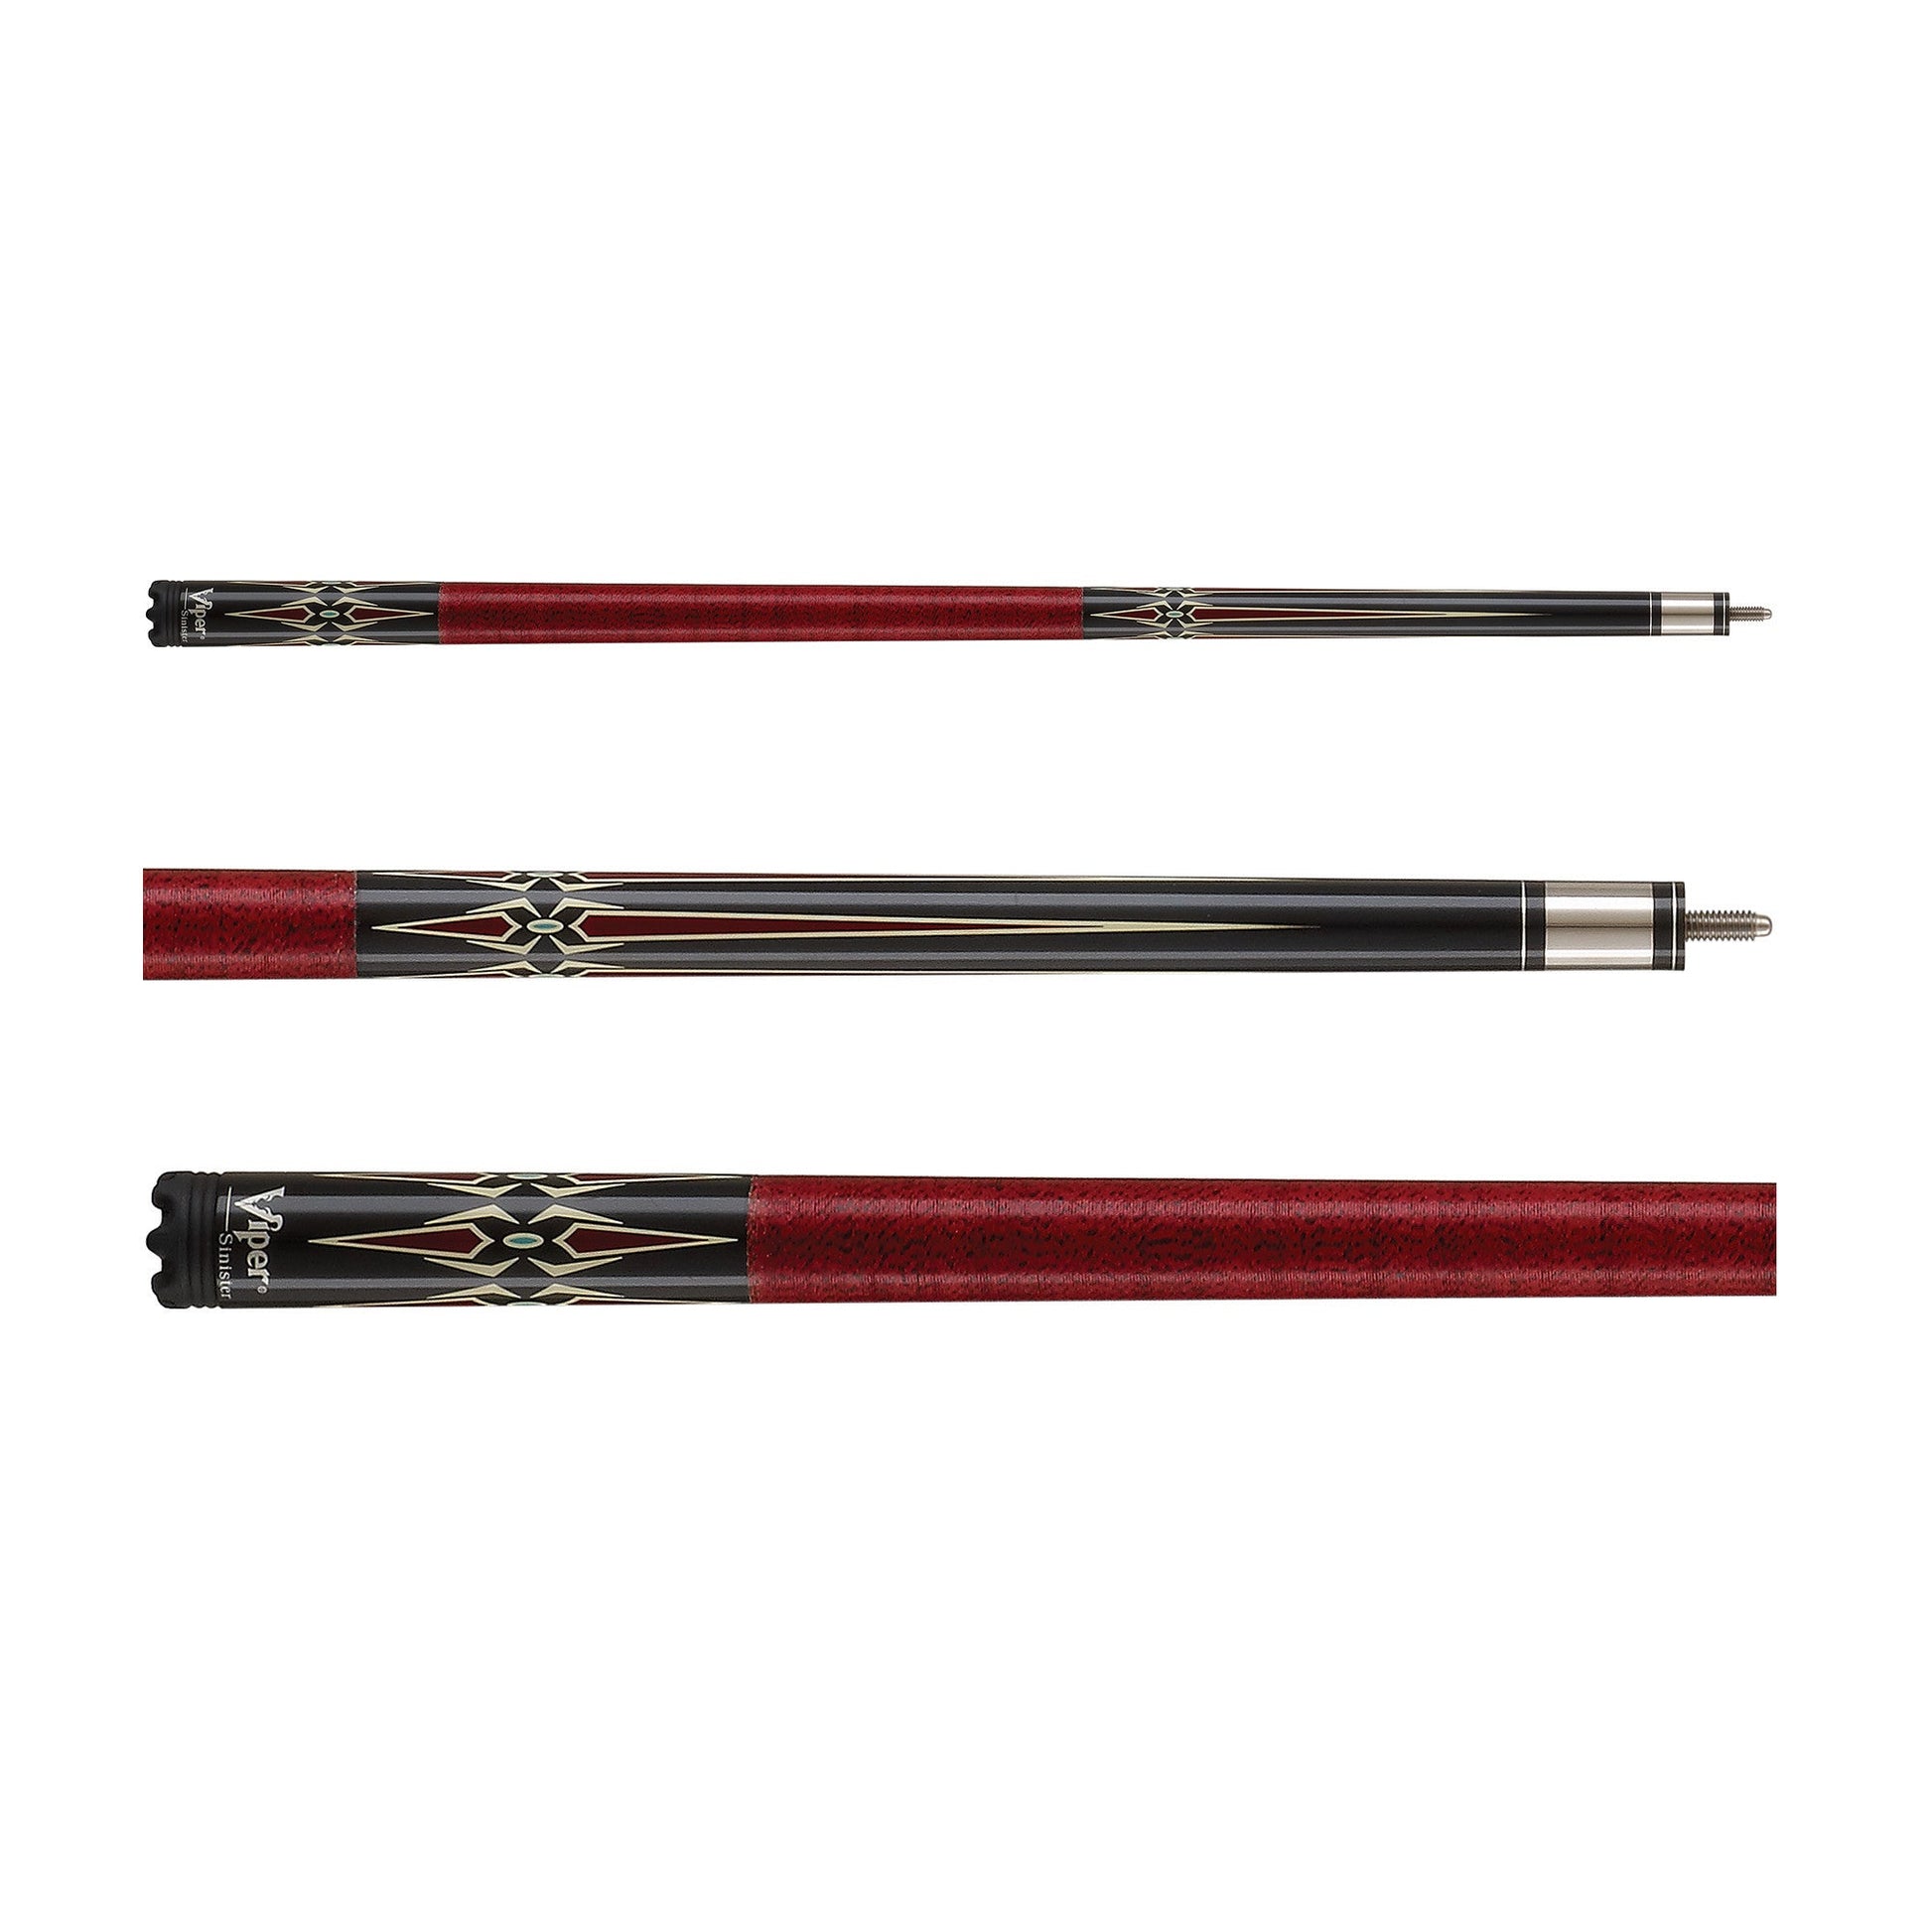 30 - Viper Sinister Red Diamonds Pool Cue Stick 21 Ounce